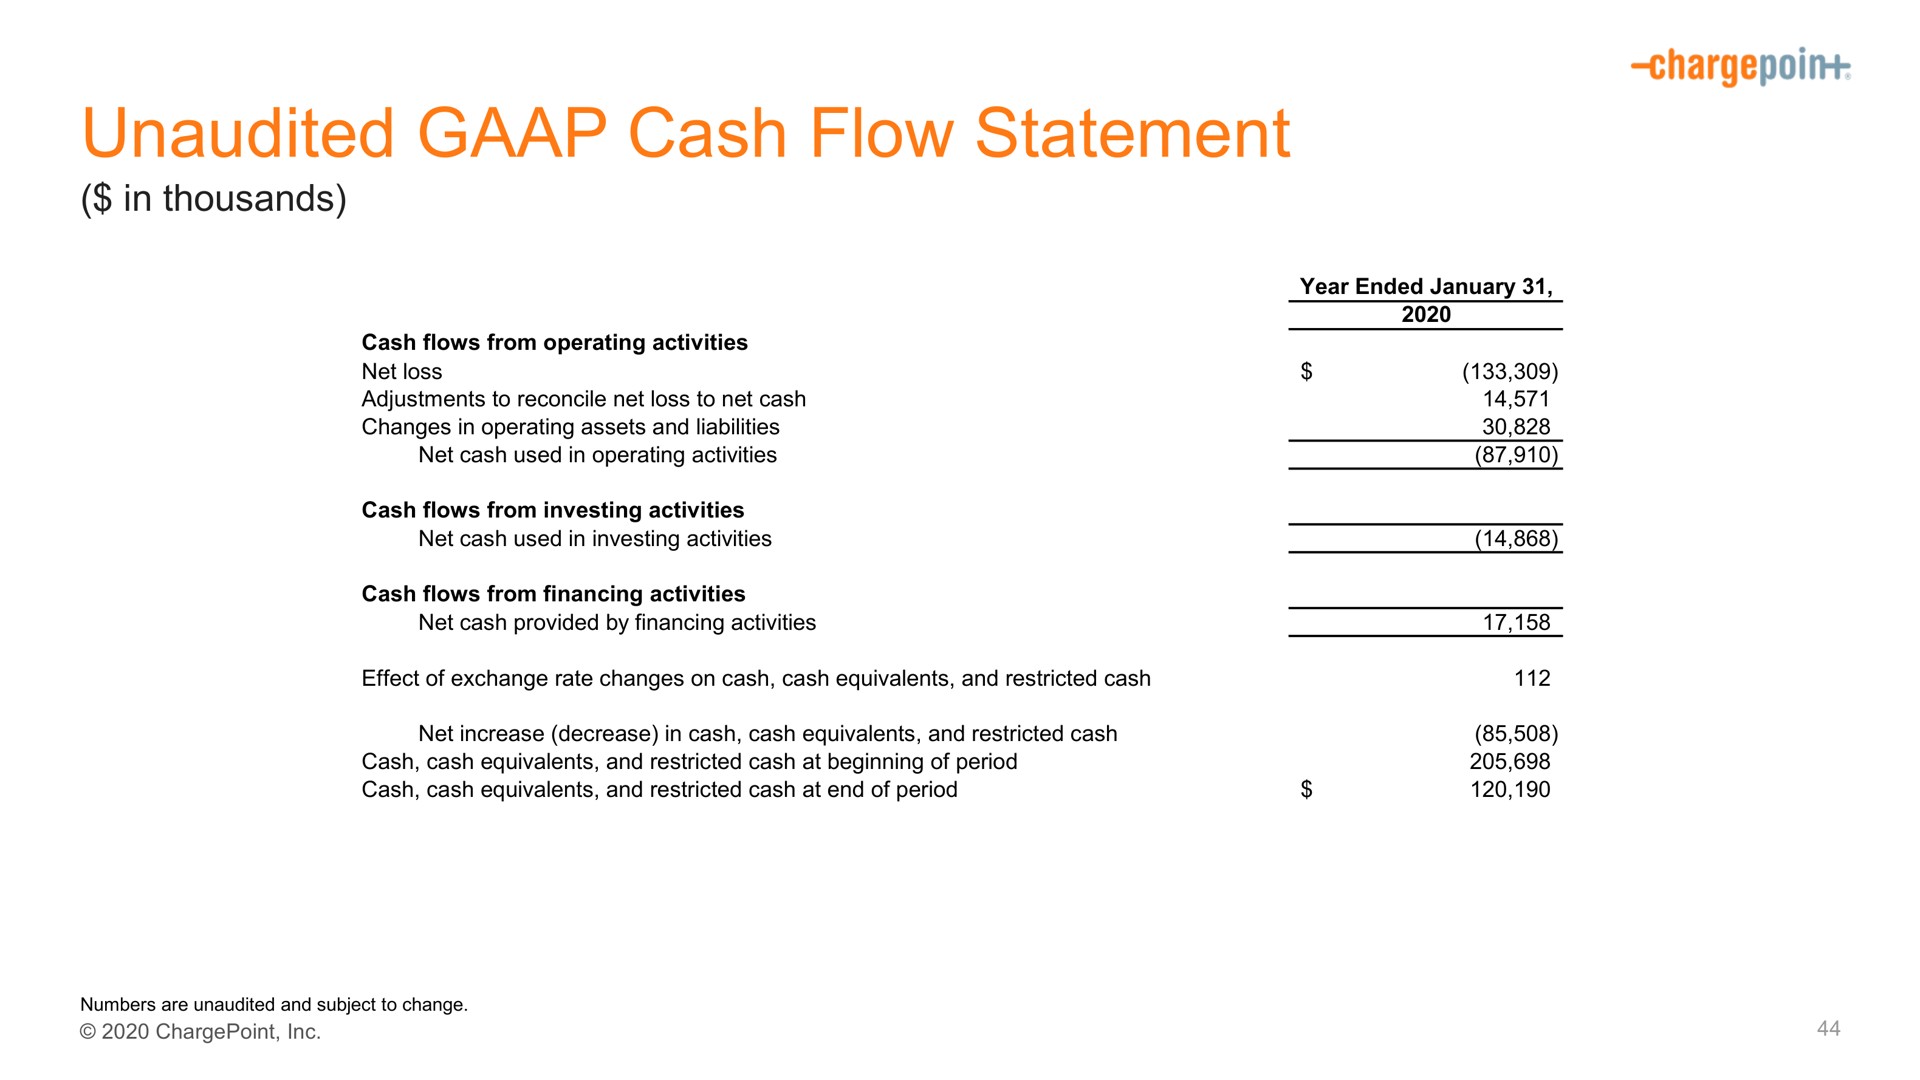 unaudited cash flow statement | ChargePoint